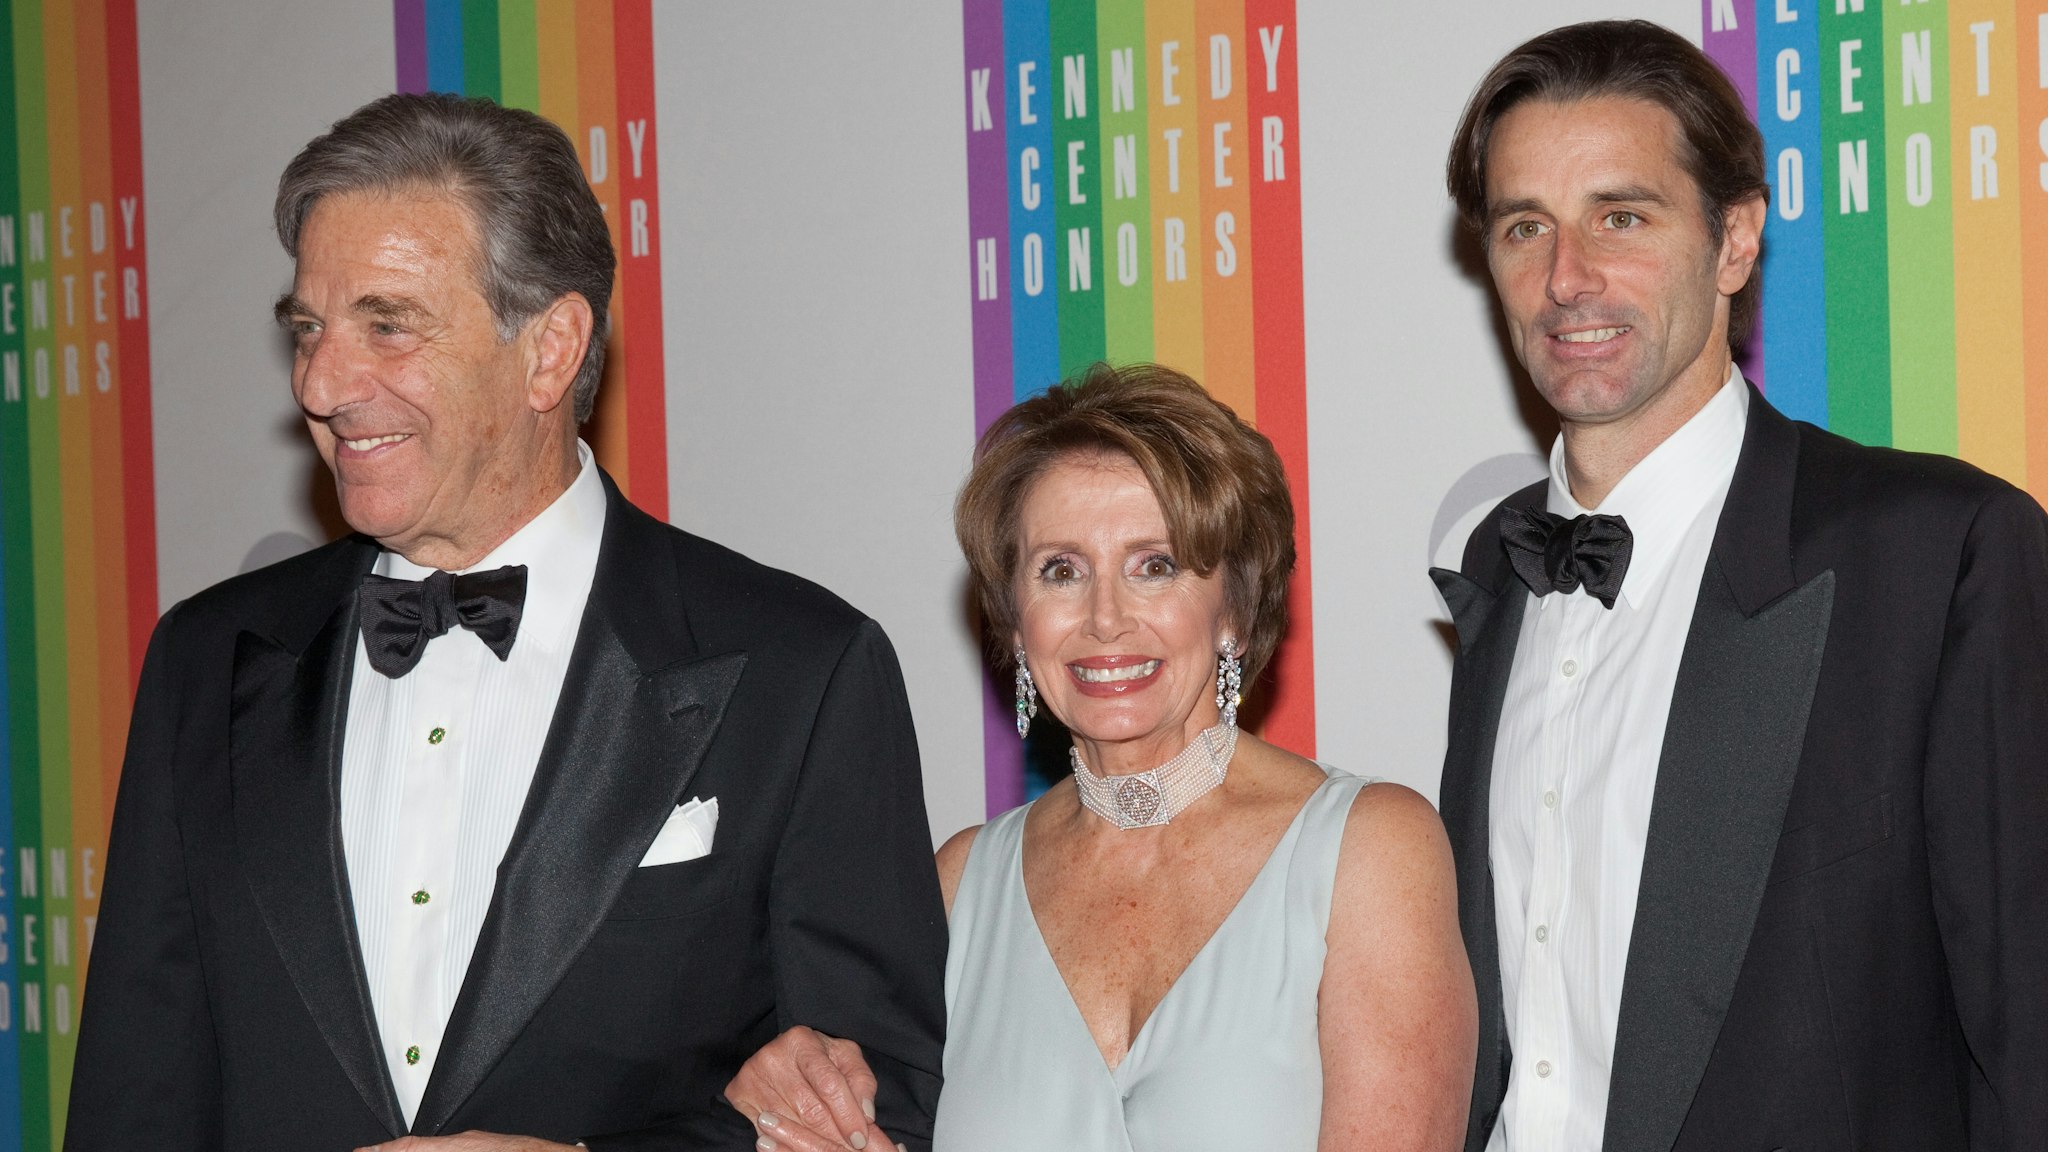 House Minority Leader Nancy Pelosi (C) arrives with her husband Paul Pelosi (L) and son Paul Pelosi, Jr. at the 35th Kennedy Center Honors, at the Kennedy Center in Washington, DC, December 2, 2012.